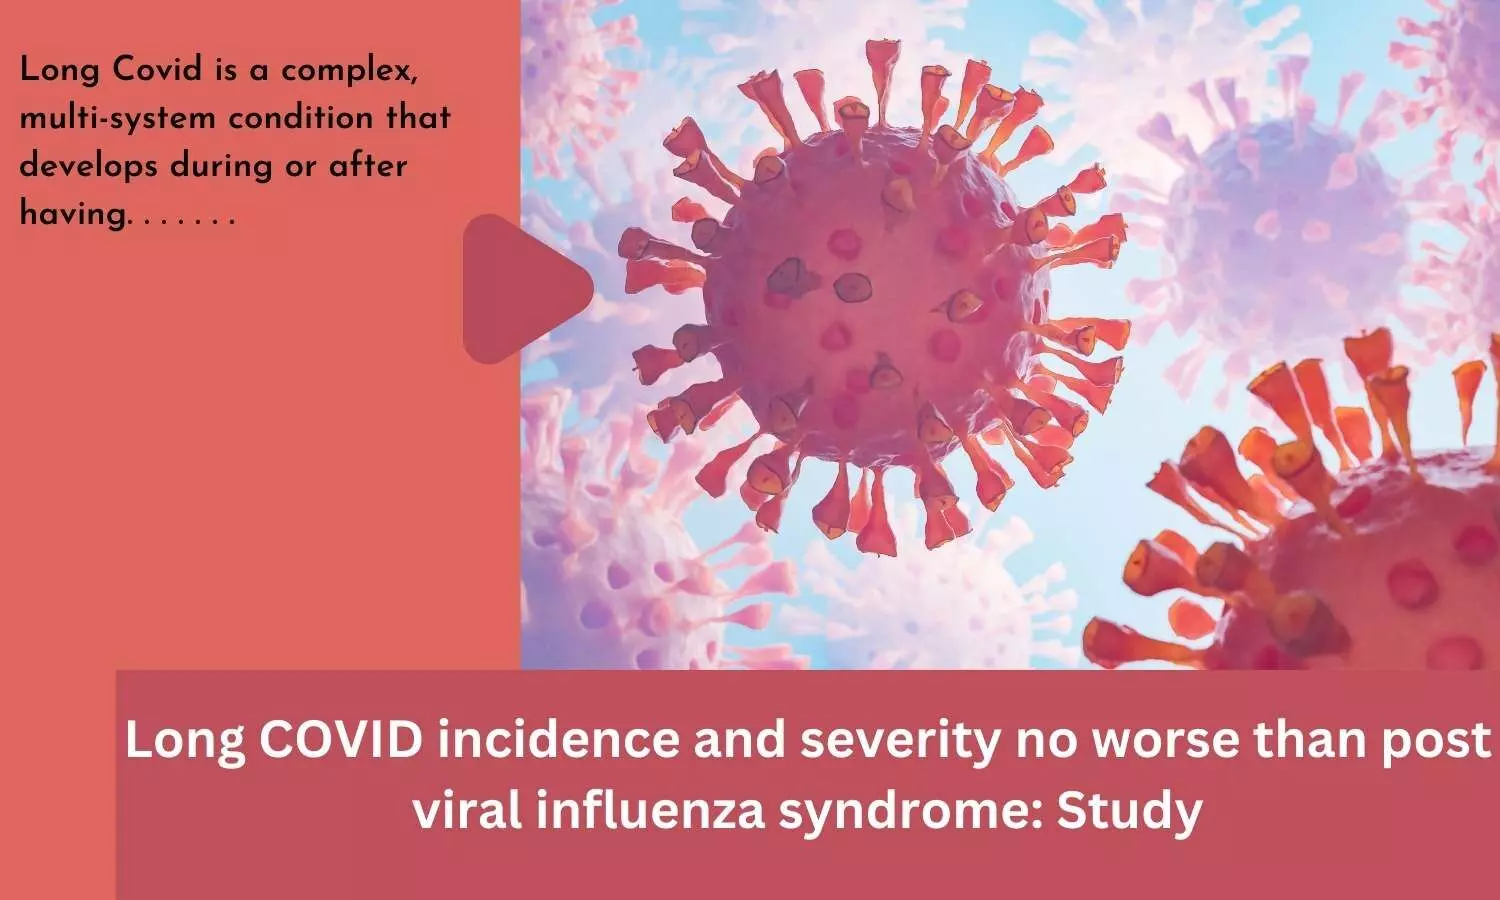 Long COVID incidence and severity no worse than post viral influenza syndrome: Study